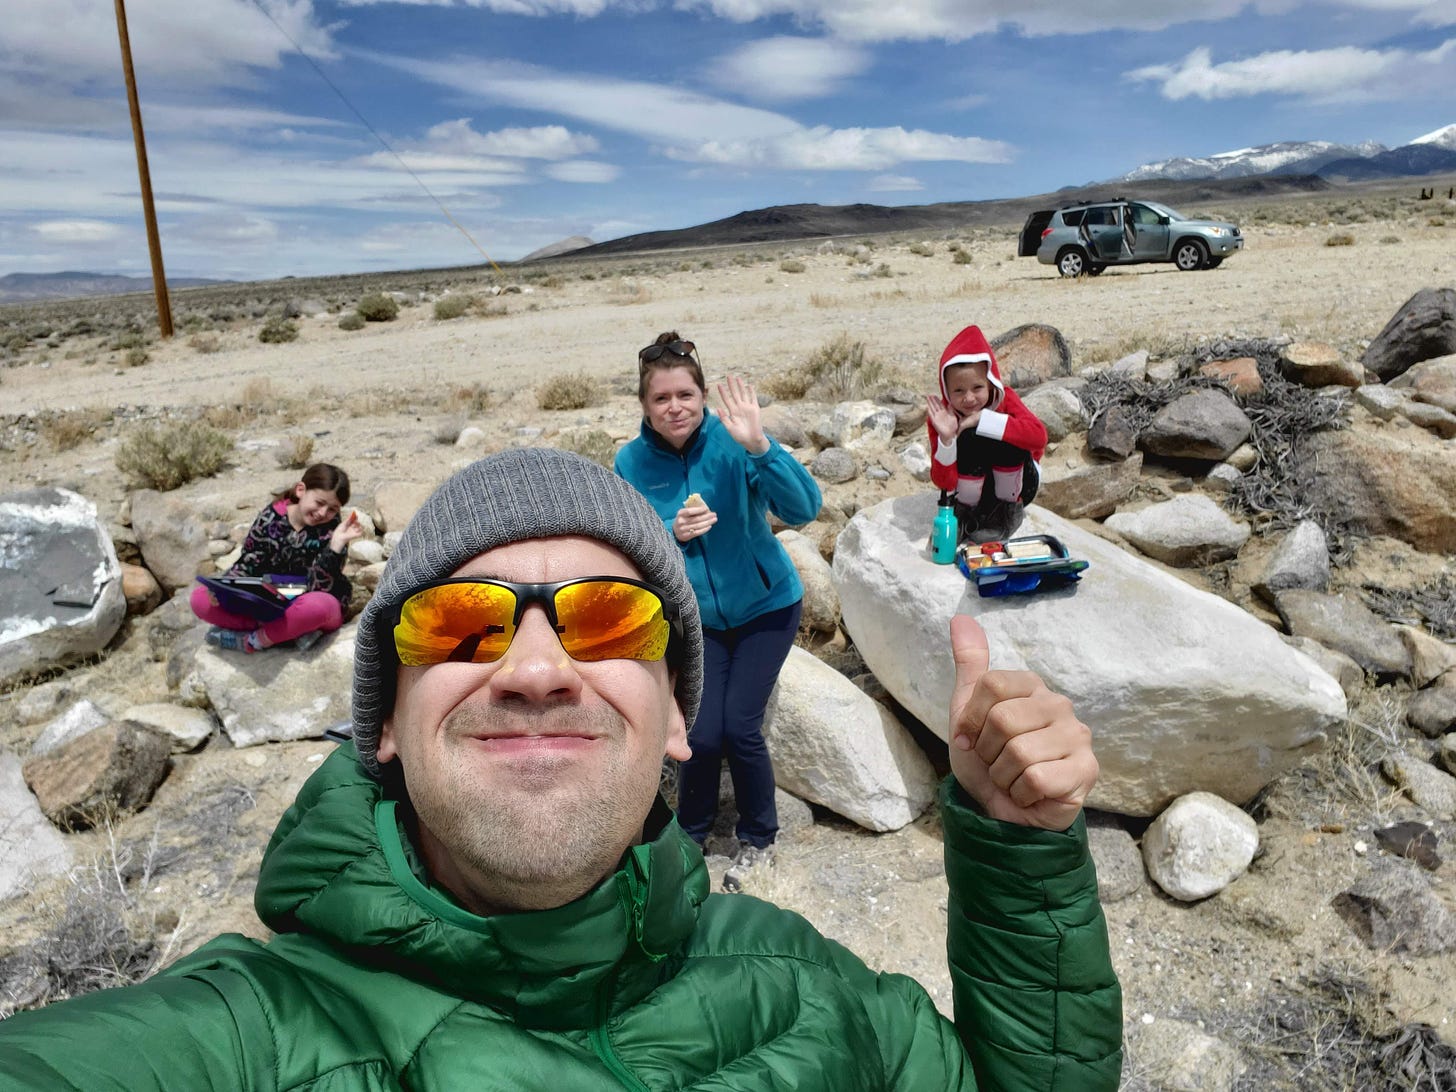 Eric taking a selfie with C, Charlotte, and L behind him sitting on rocks with their lunches in front of them.